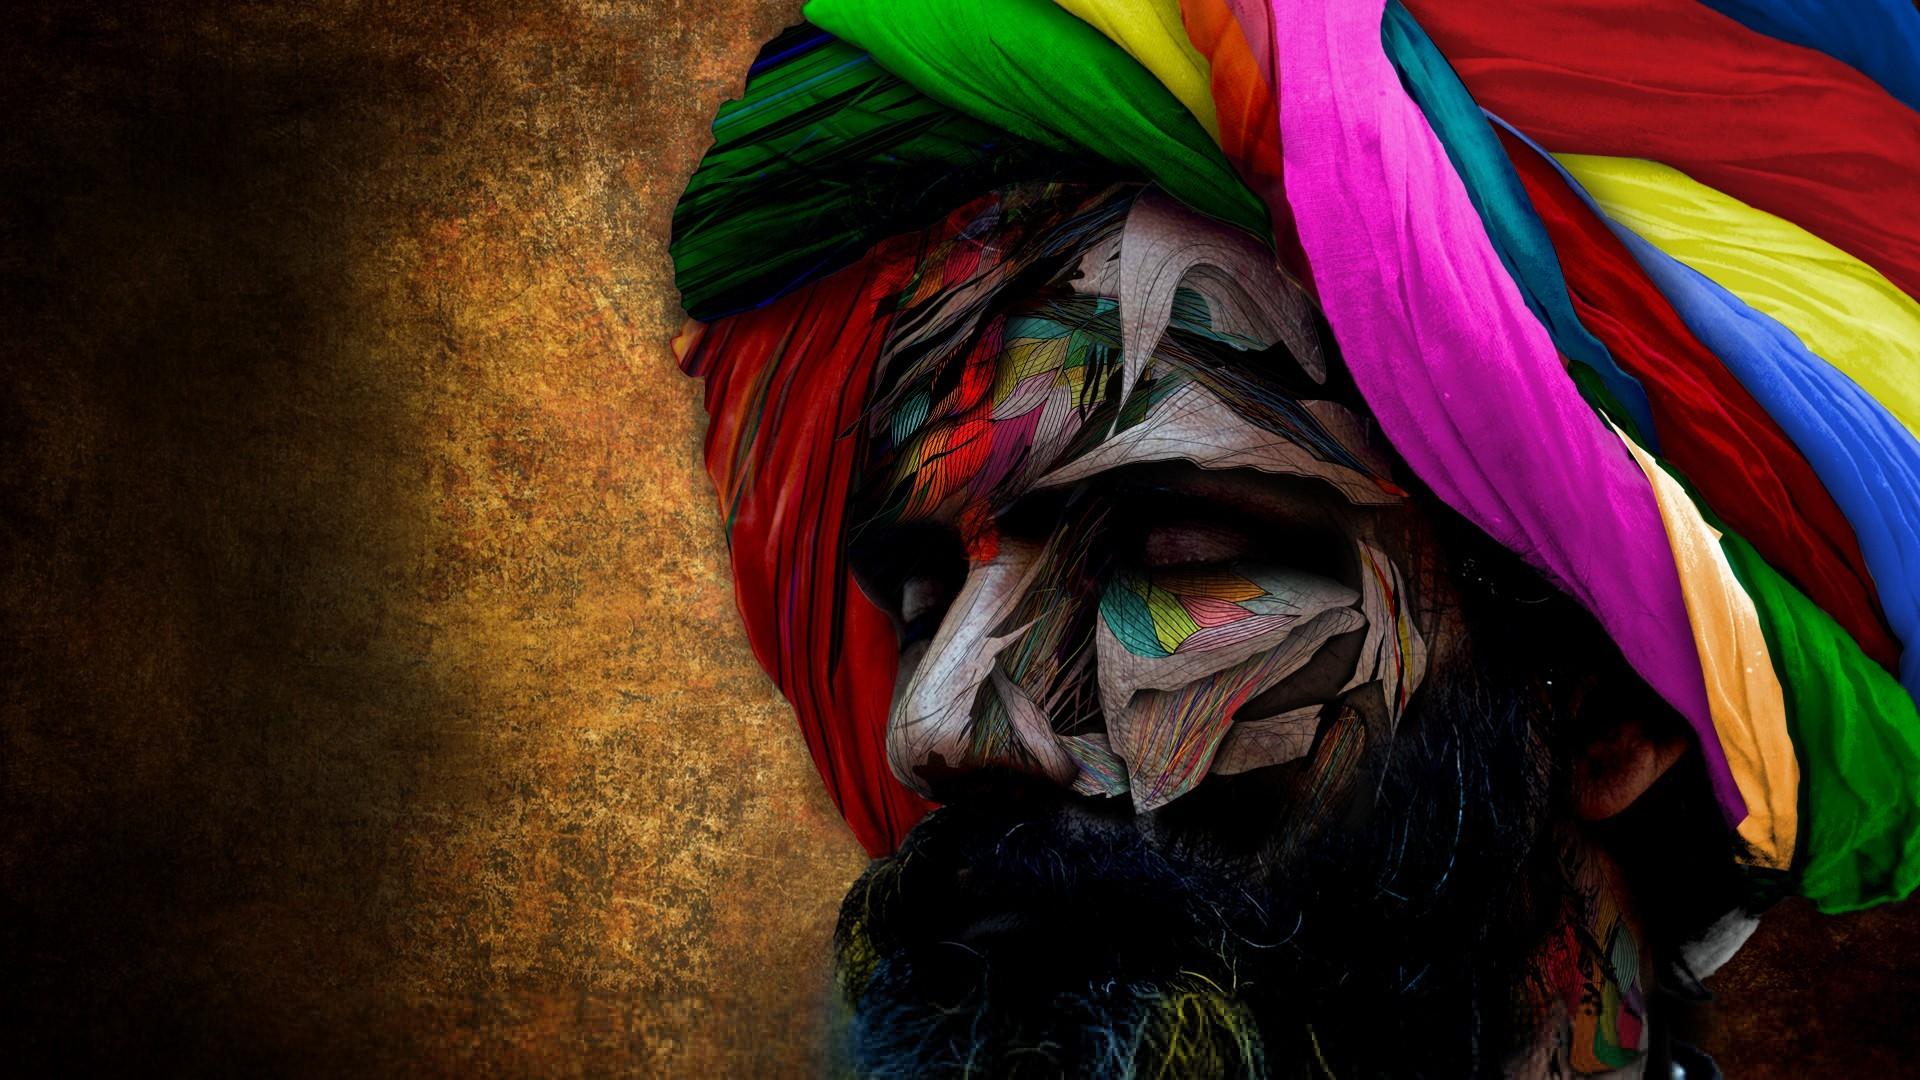 beard wallpaper for mobile,close up,headgear,colorfulness,textile,photography